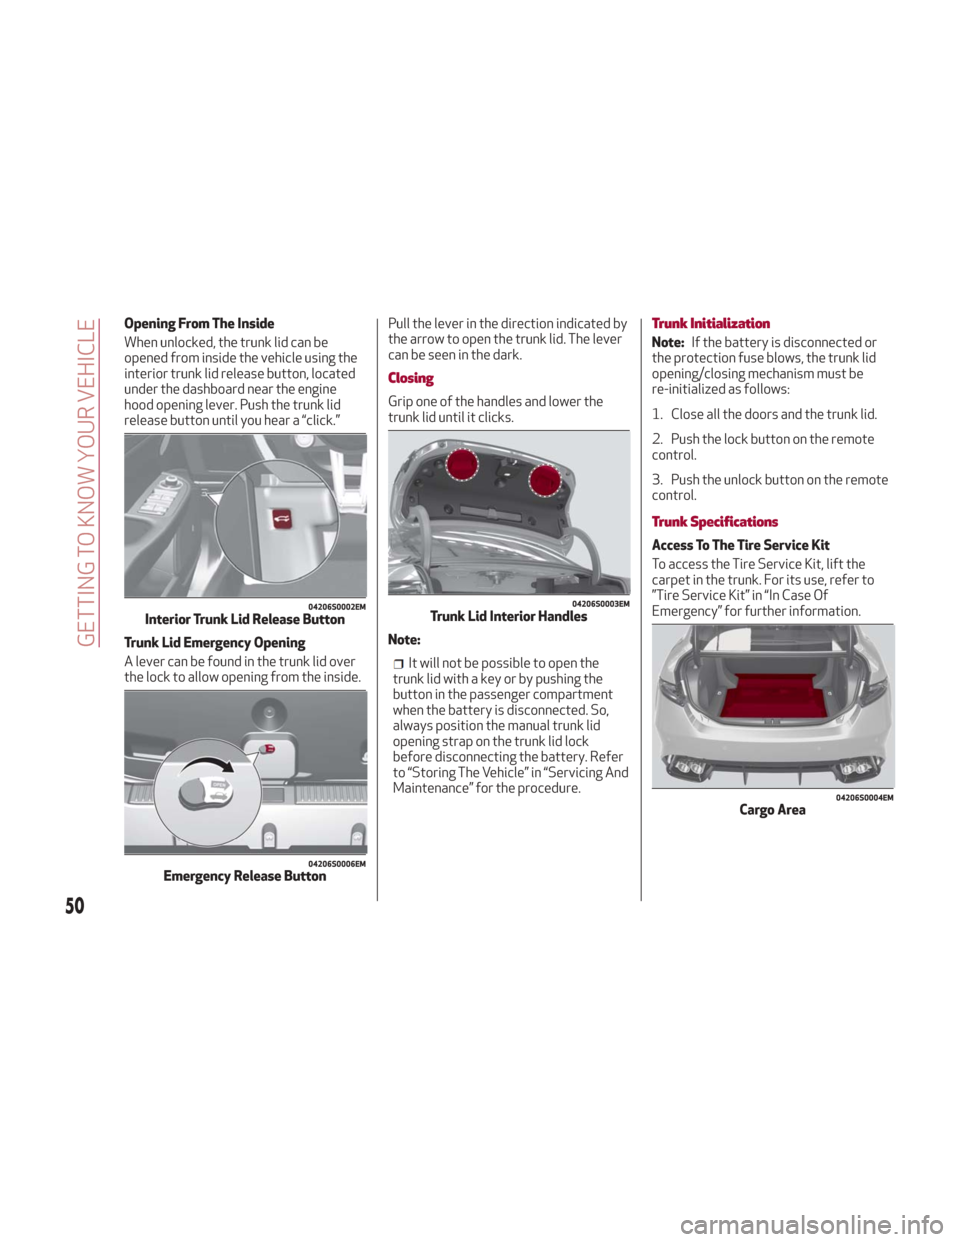 Alfa Romeo Giulia 2018 Owners Guide Opening From The Inside
When unlocked, the trunk lid can be
opened from inside the vehicle using the
interior trunk lid release button, located
under the dashboard near the engine
hood opening lever. 